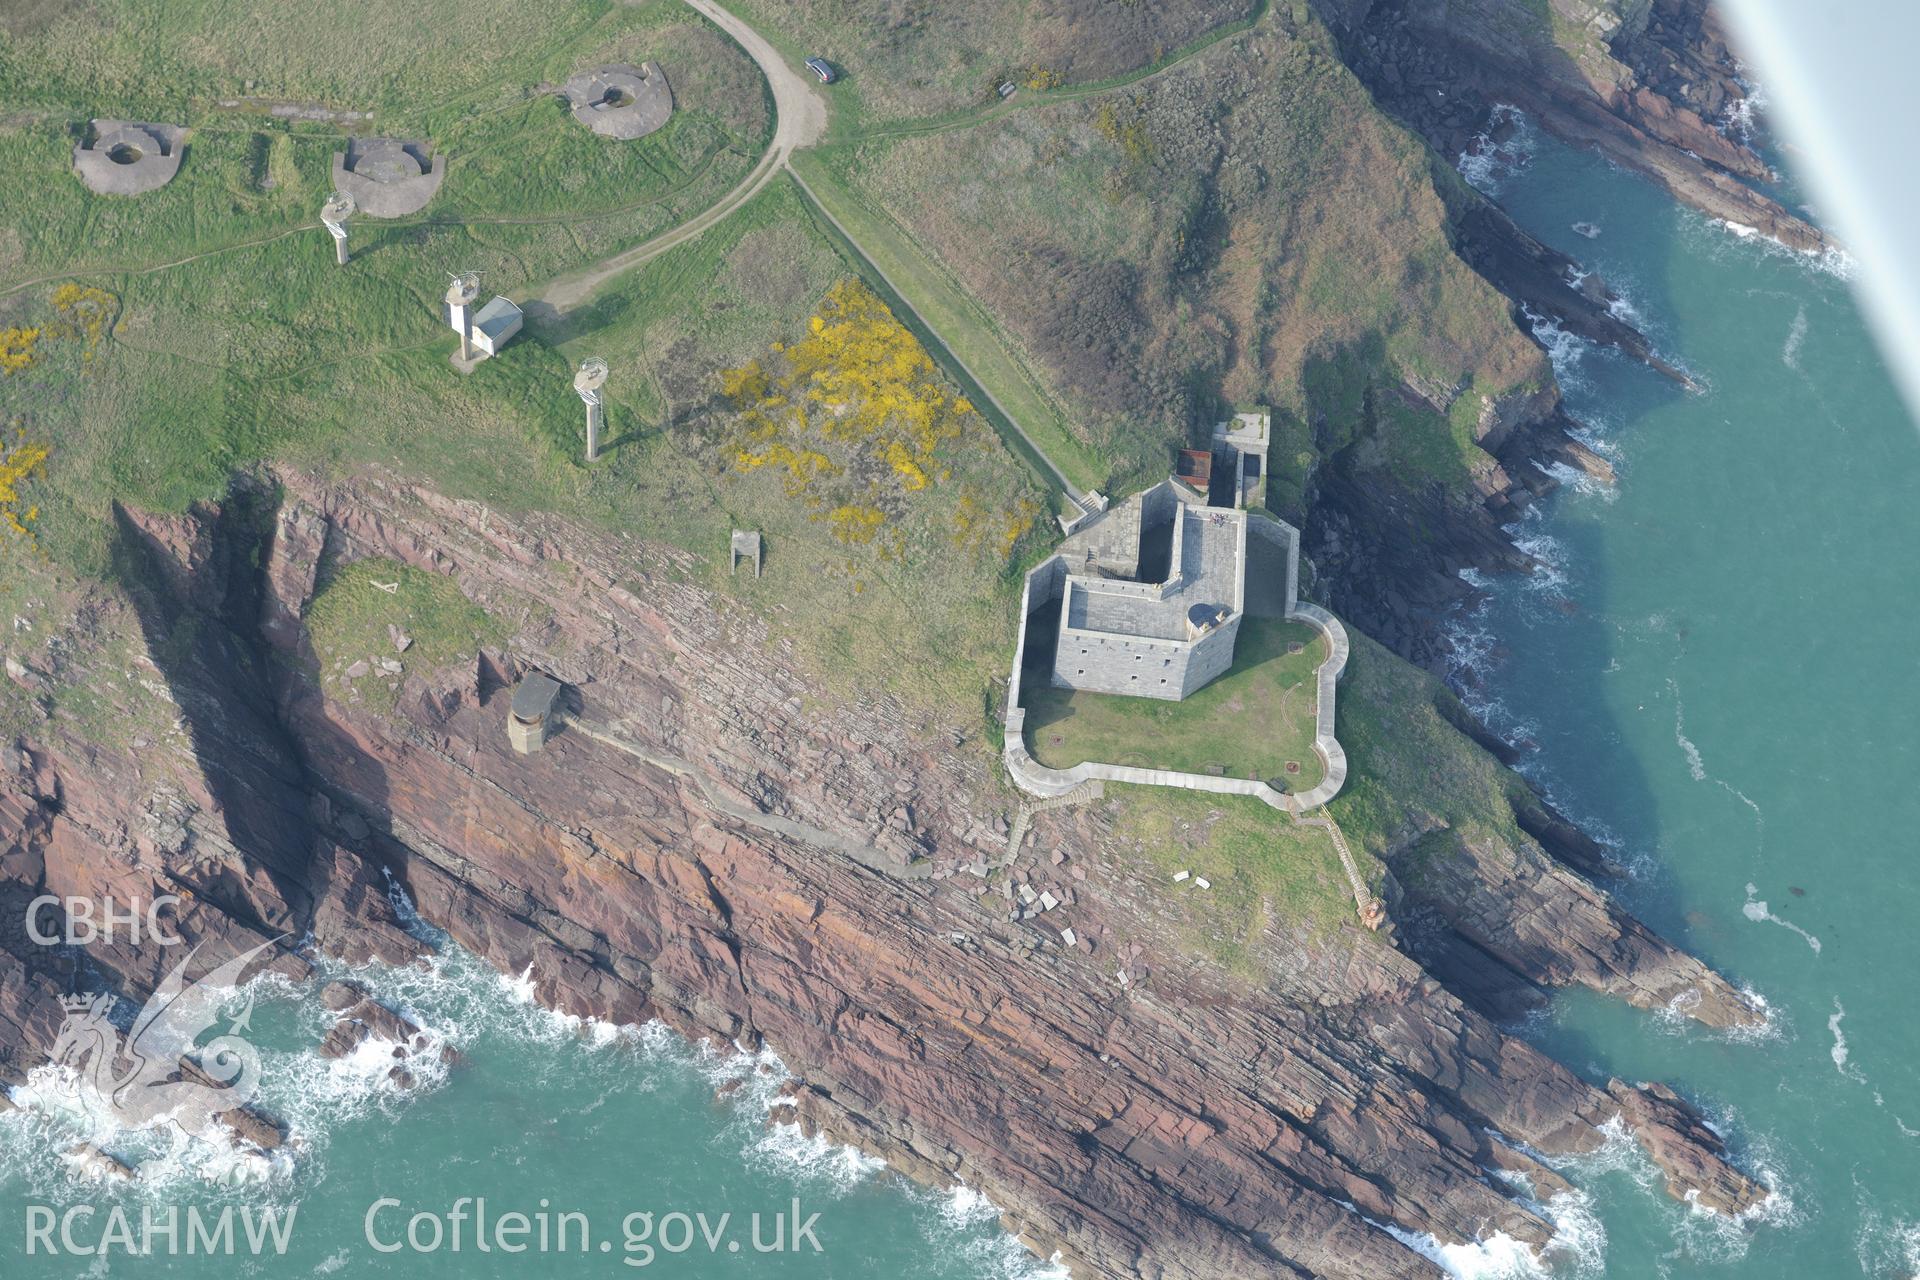 Aerial photography of West Blockhouse taken on 27th March 2017. Baseline aerial reconnaissance survey for the CHERISH Project. ? Crown: CHERISH PROJECT 2017. Produced with EU funds through the Ireland Wales Co-operation Programme 2014-2020. All material made freely available through the Open Government Licence.